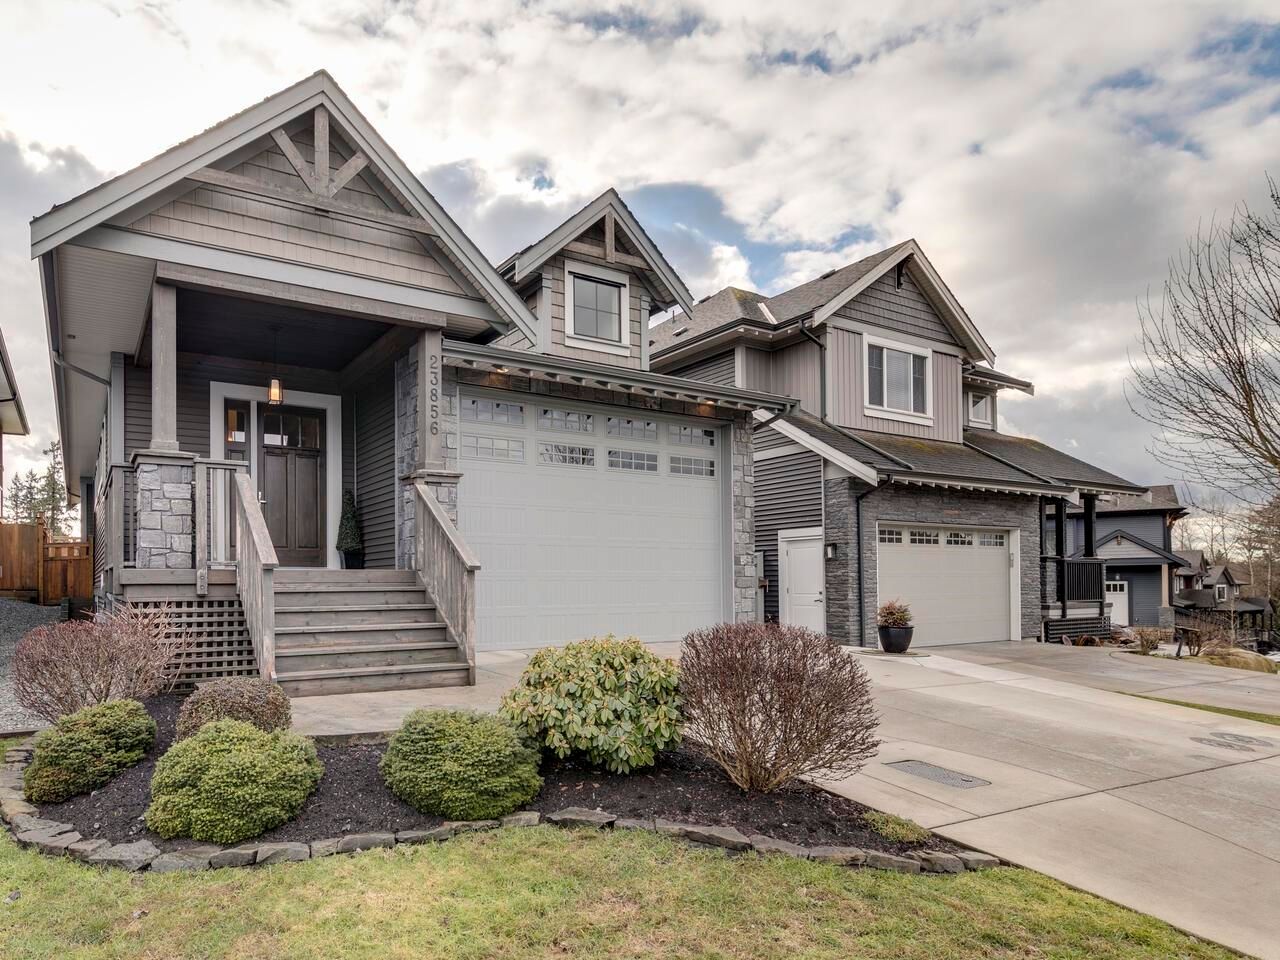 See Ken and Jane's New Listing in Cottonwood MR, Maple Ridge